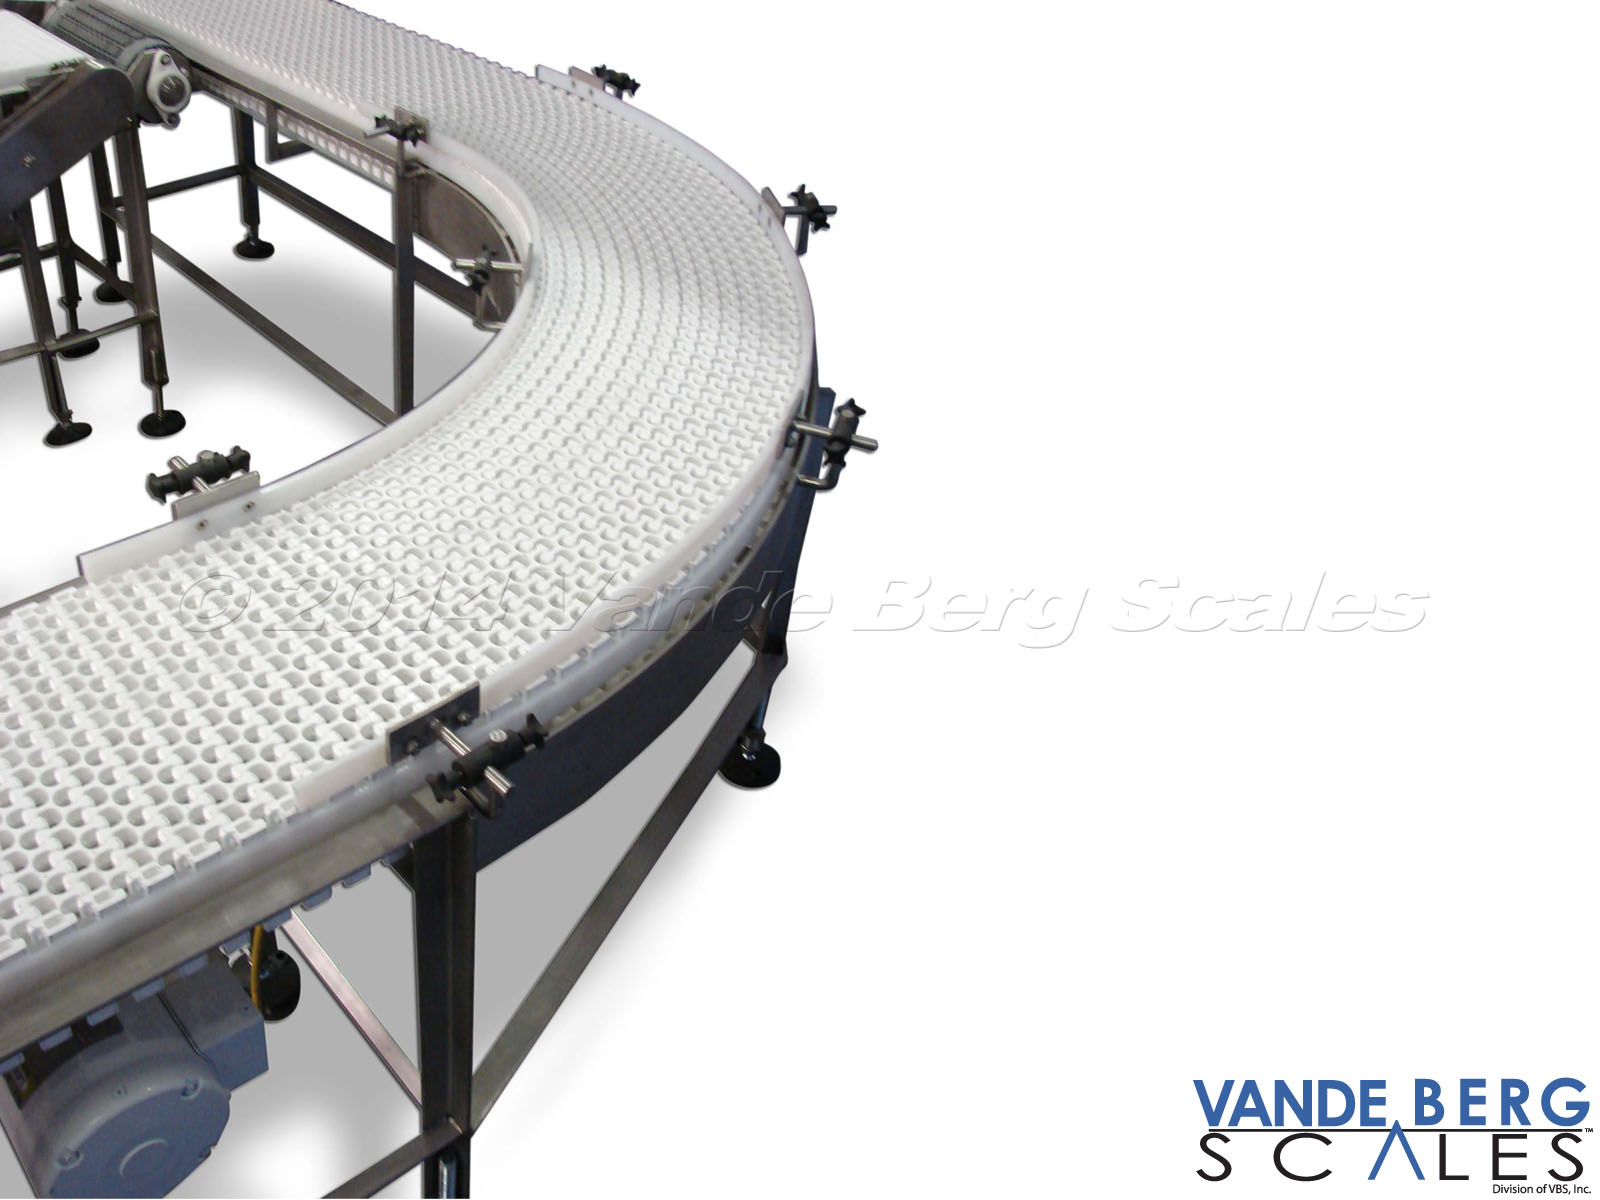 Curved conveyor showing foot bracing and side rails.